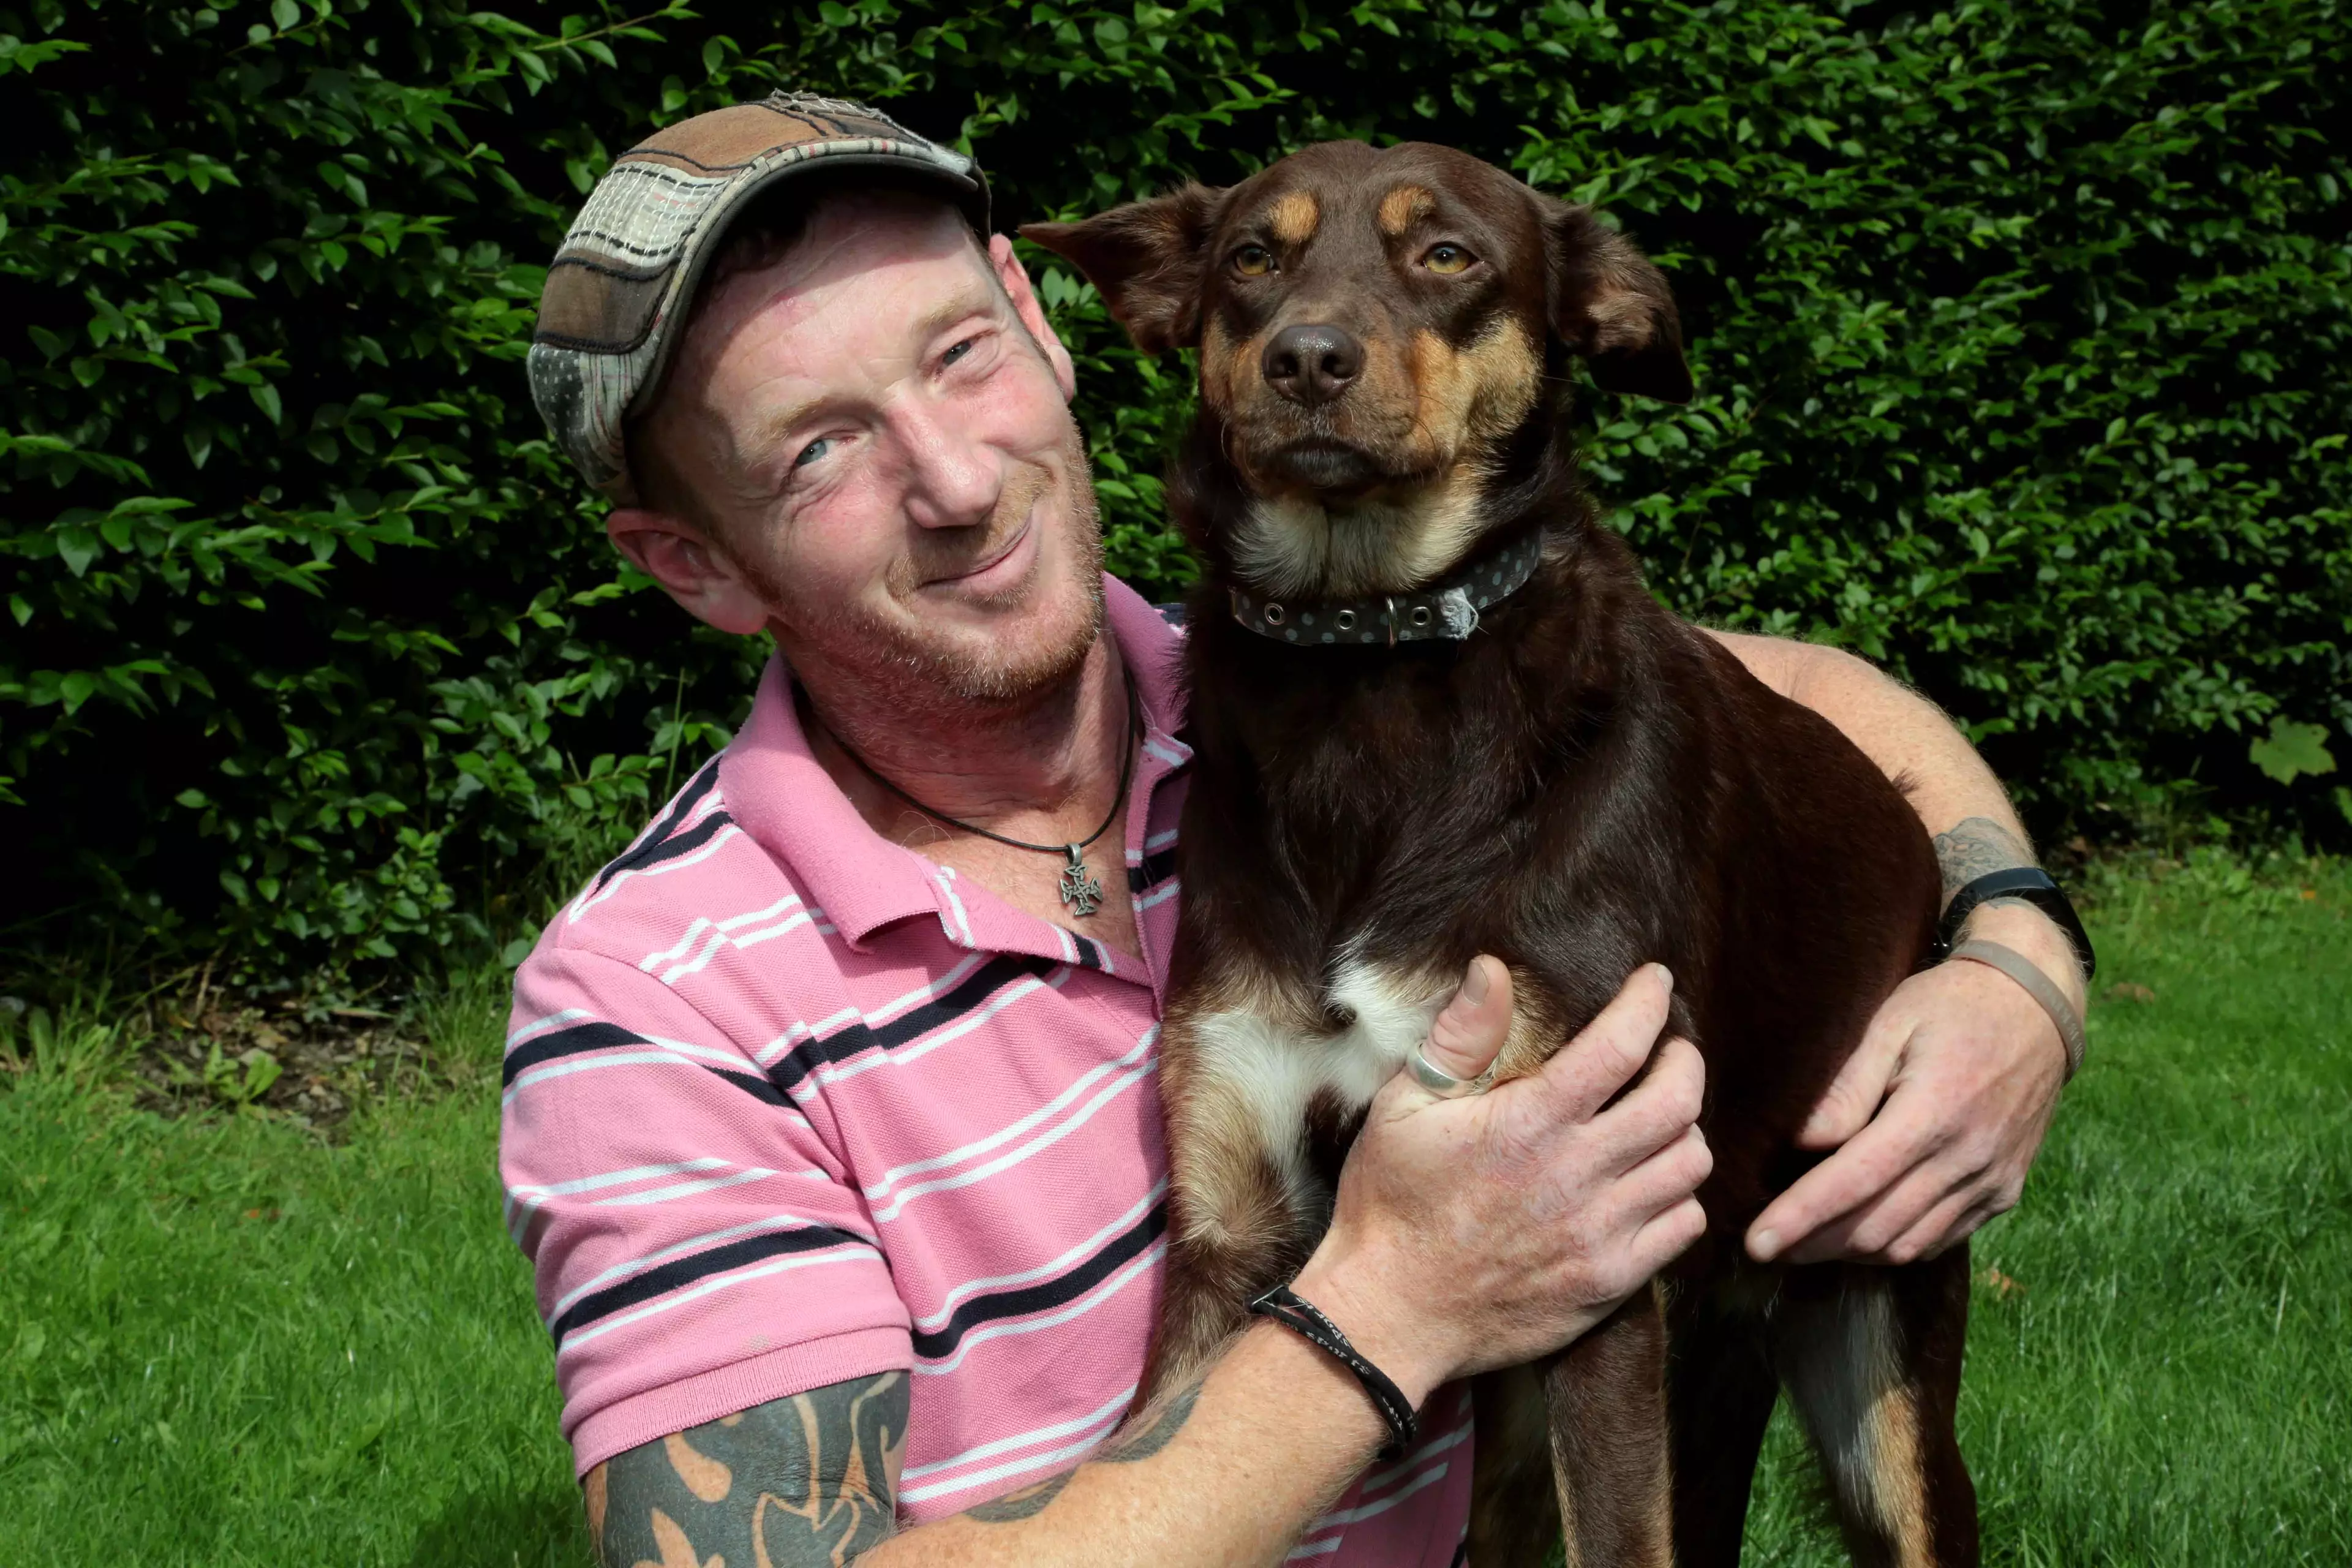 Recovering alcoholic Chris Rees with his dog Fudge.